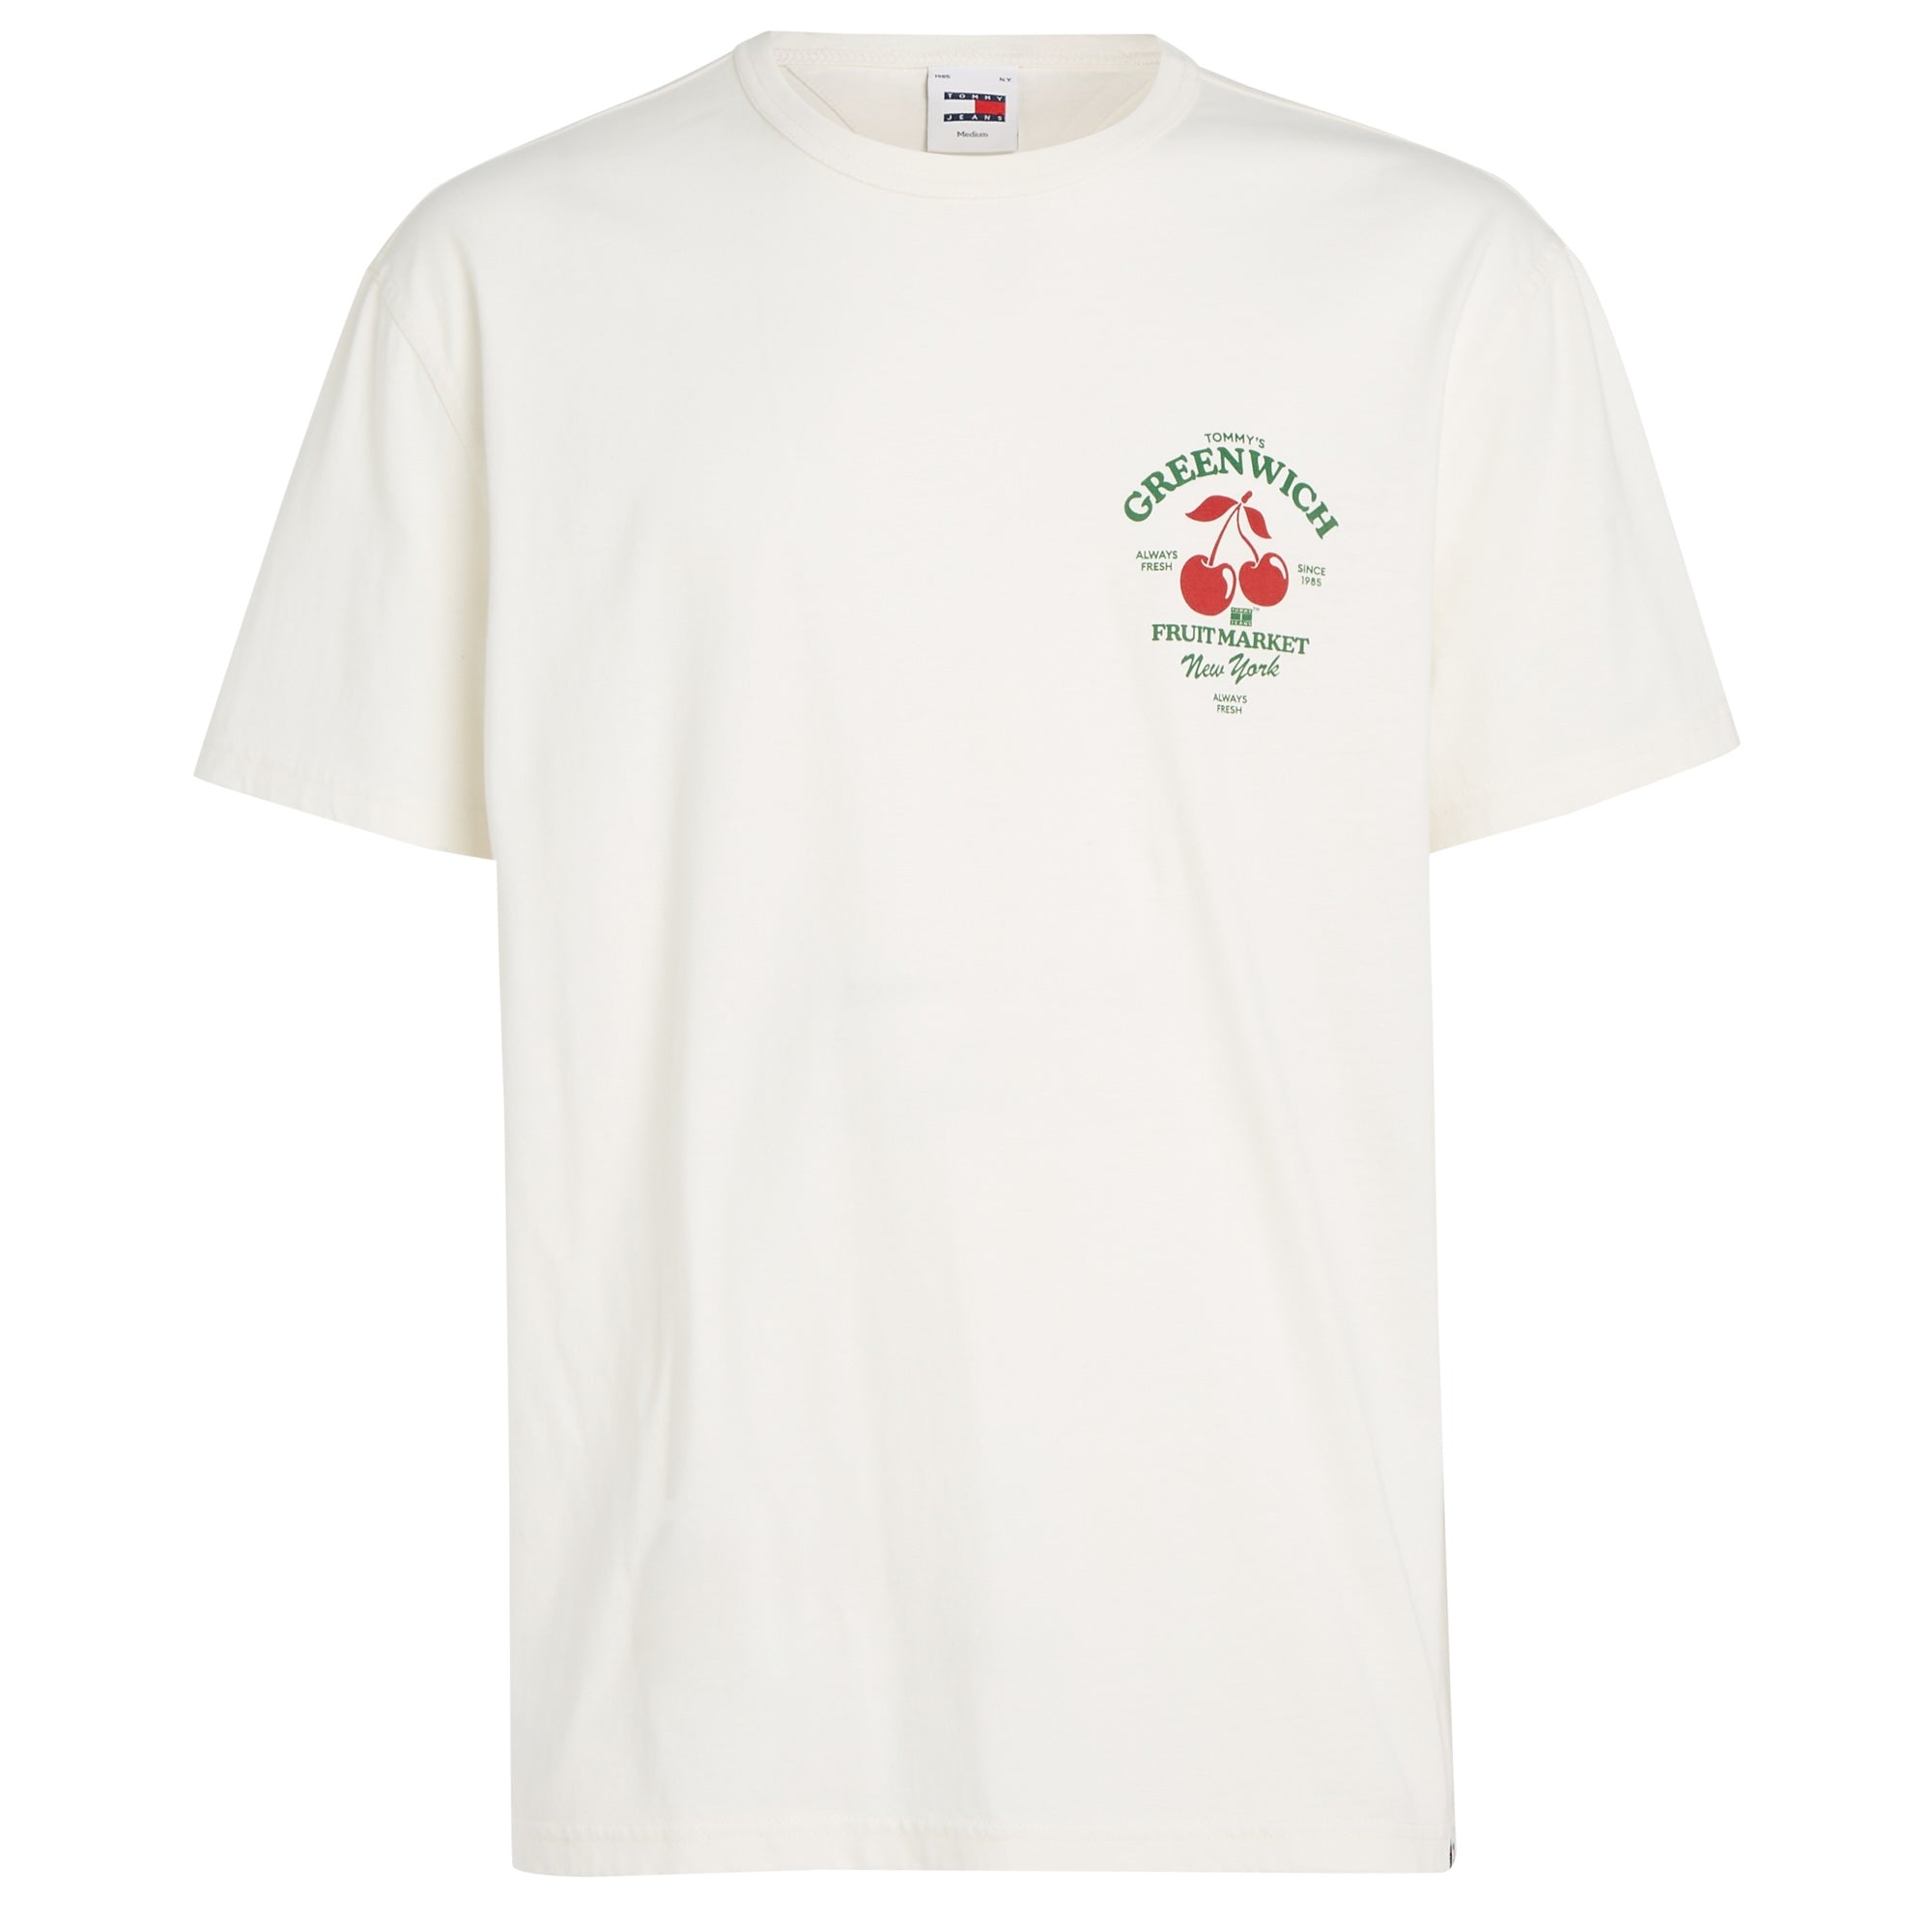 Tommy Jeans Greenwich Fruit Market Graphic T-Shirt - Ancient White